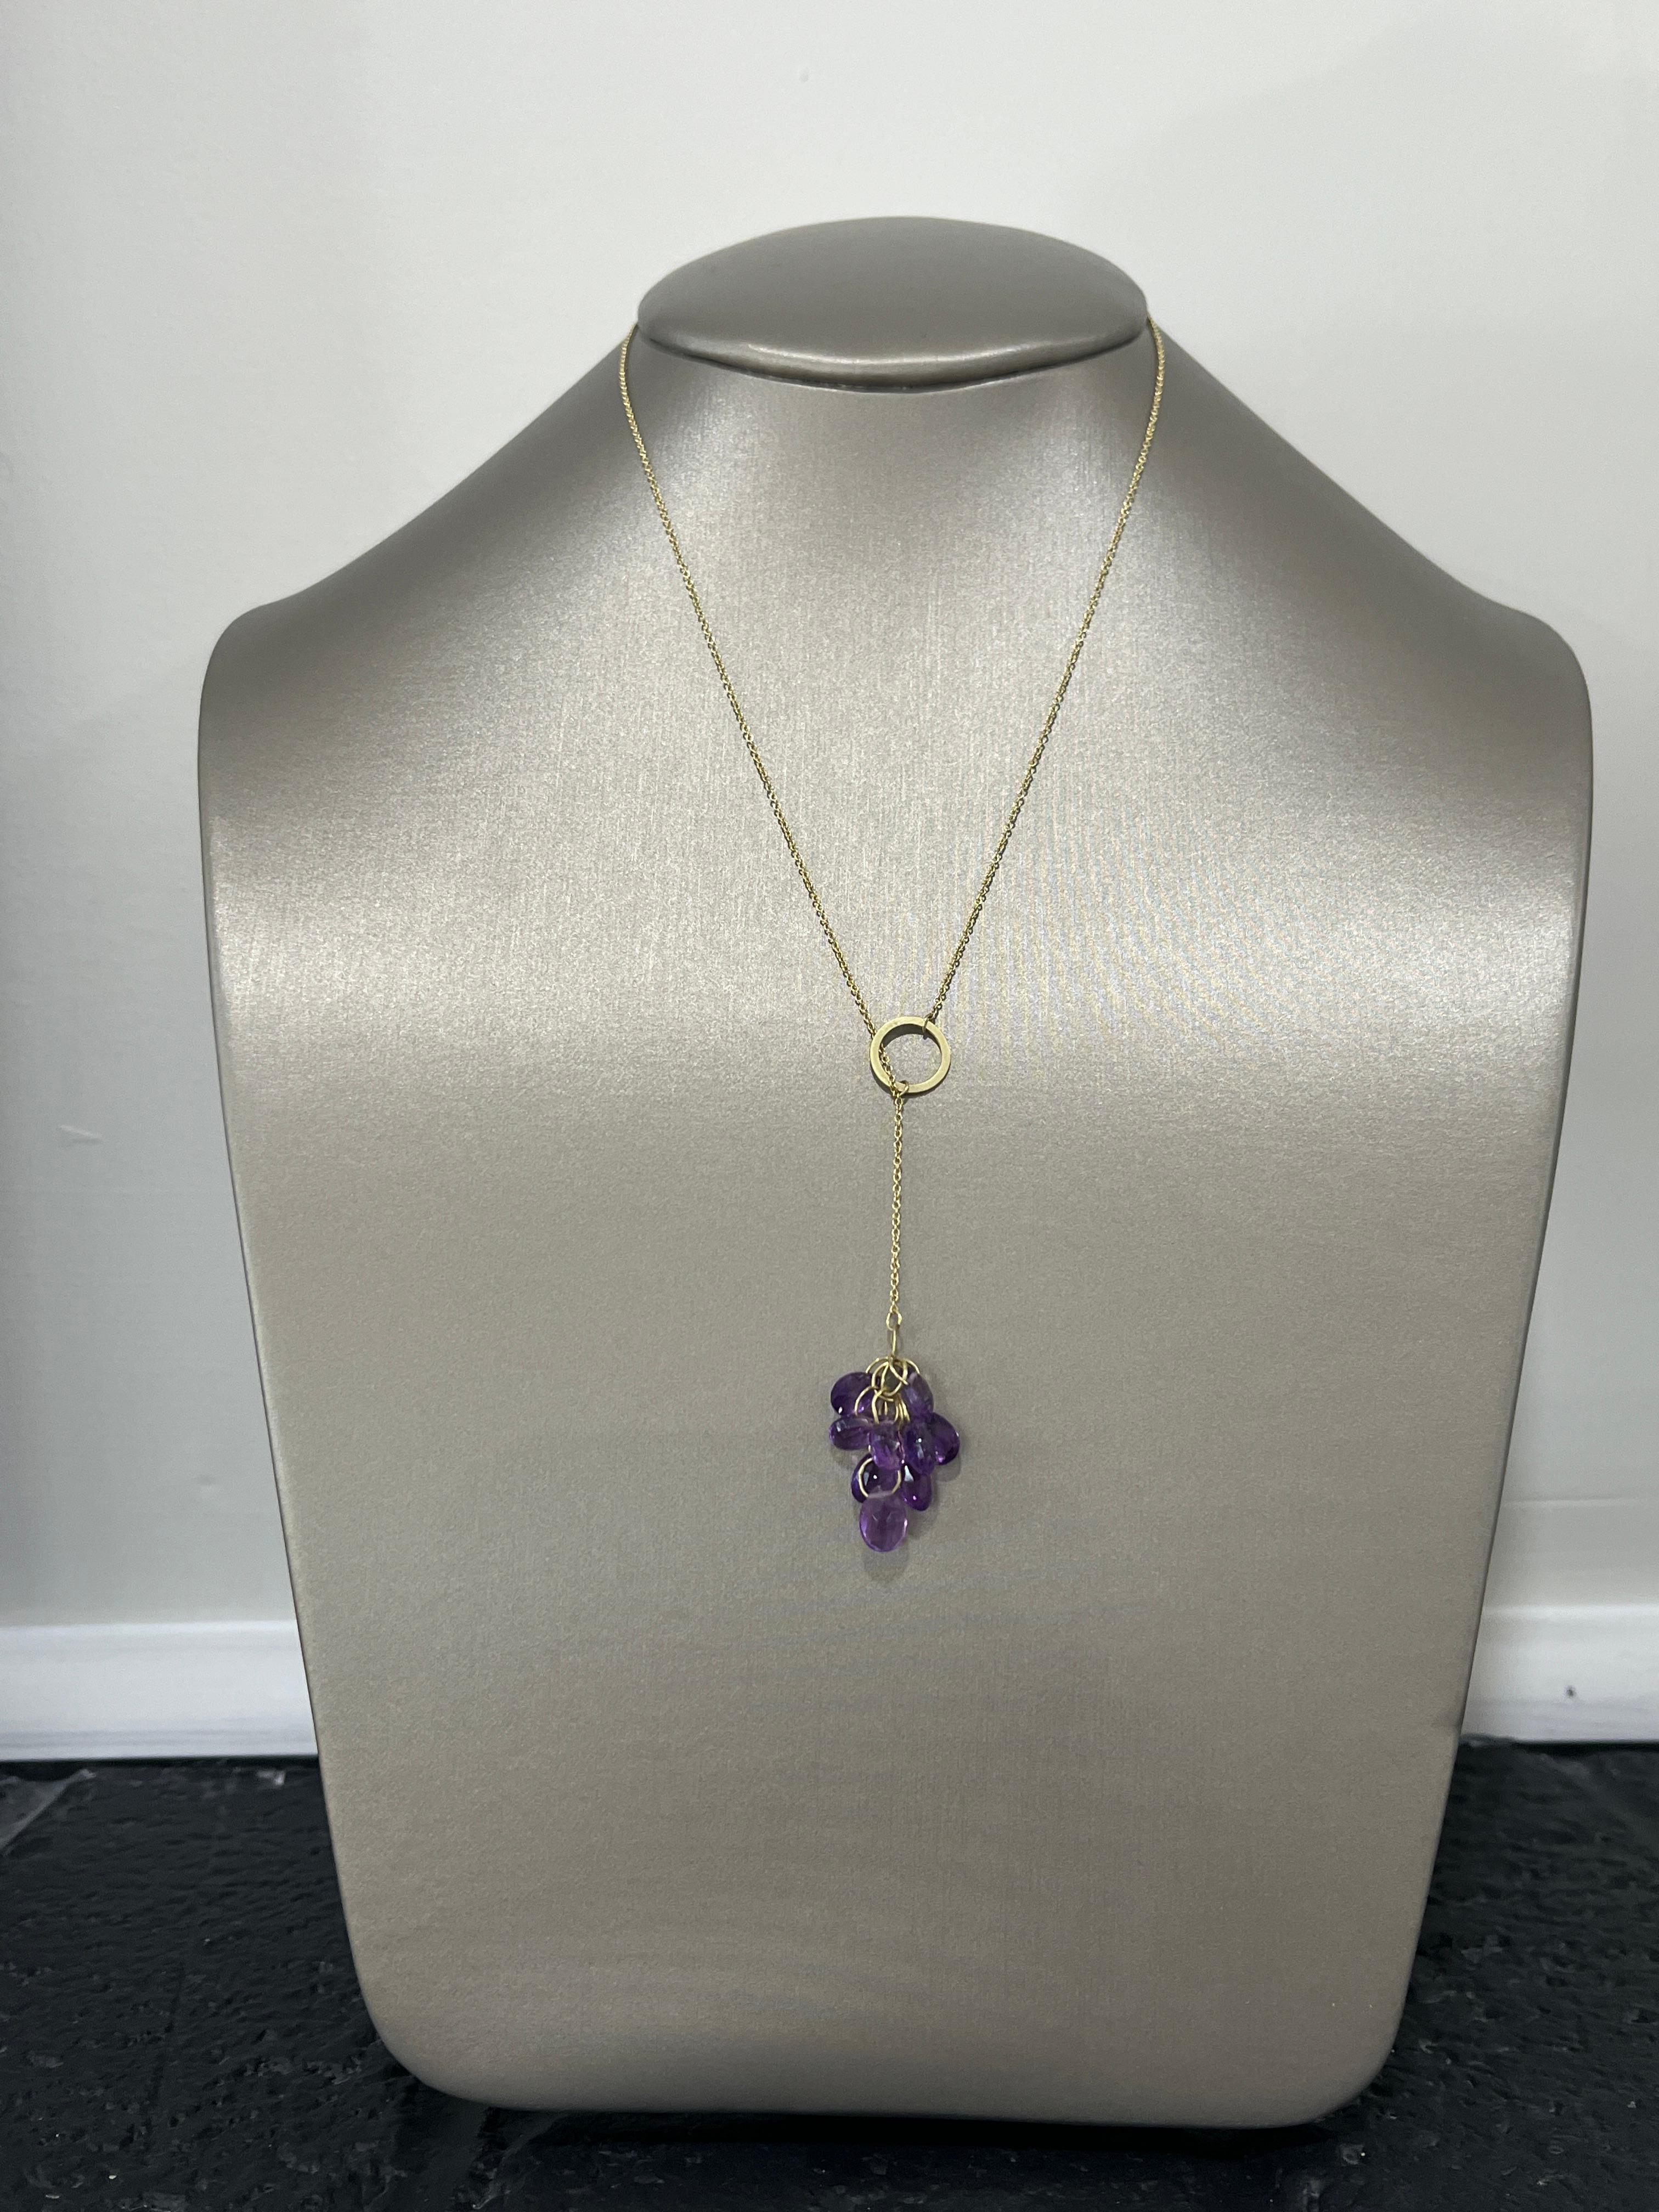 Faye Kim's 18 Karat Gold custom handcrafted Amethyst Y Necklace, with its briolette cluster pendant, offers an effortless, timeless style, perfect for everyday wear or special occasions. Great for layering with shorter pendants.

Length